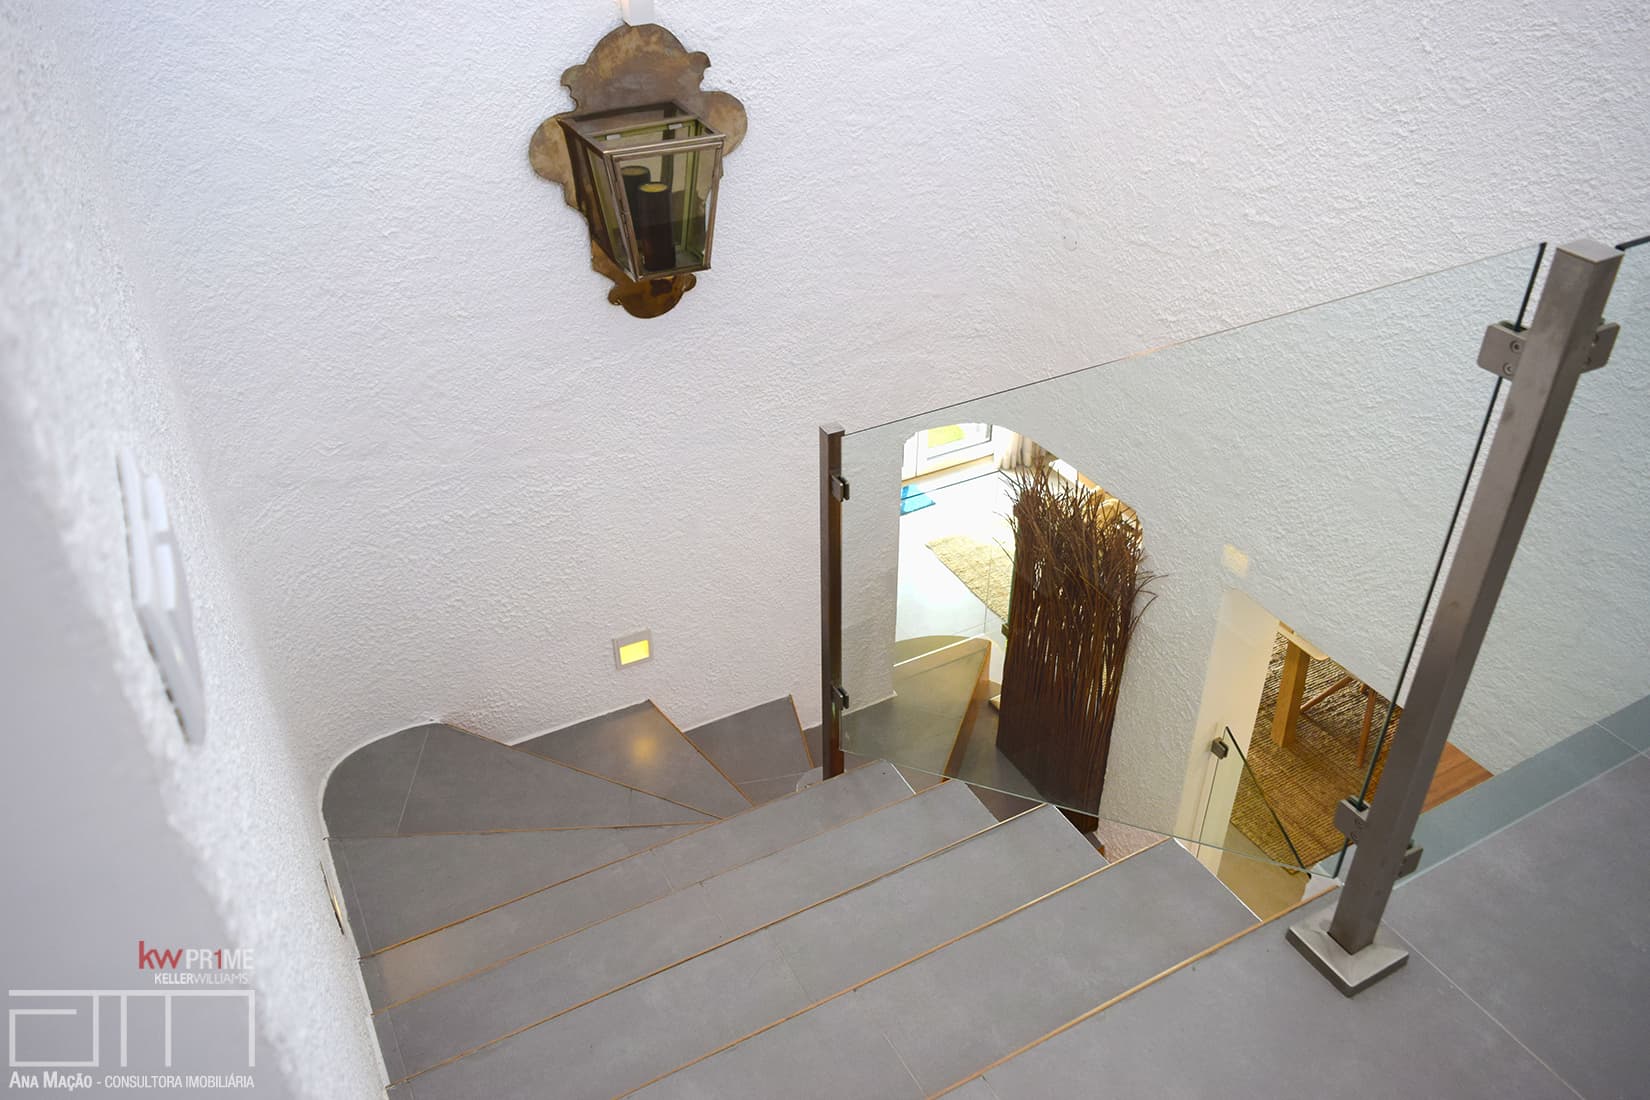 View of the connecting stairs between the two floors